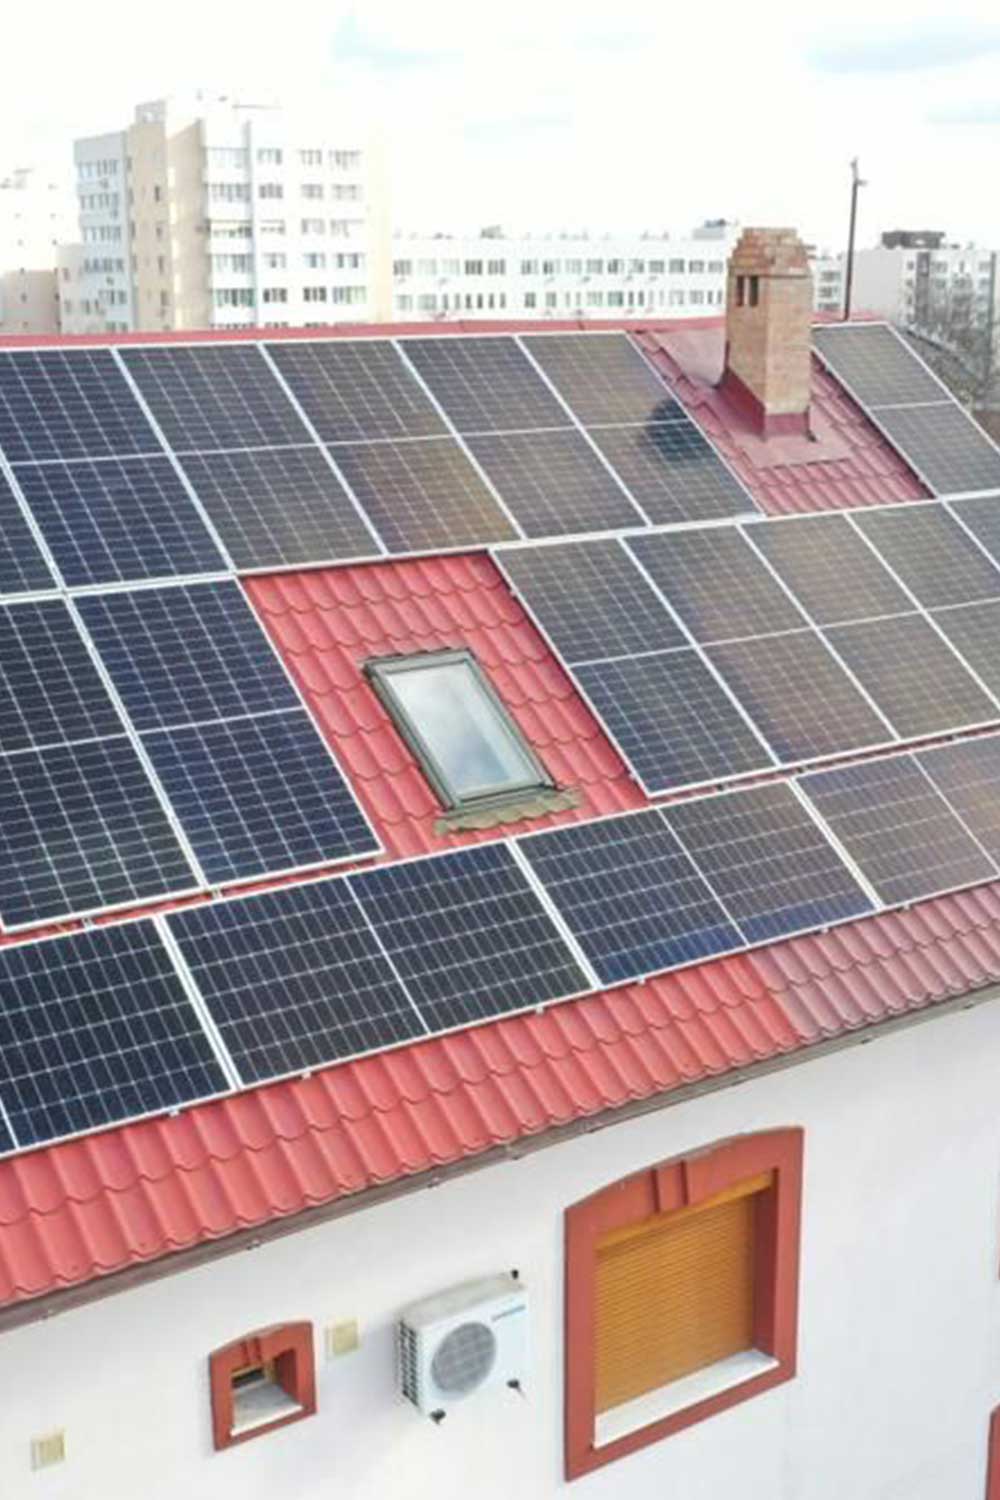 Solar panel for rooftop application